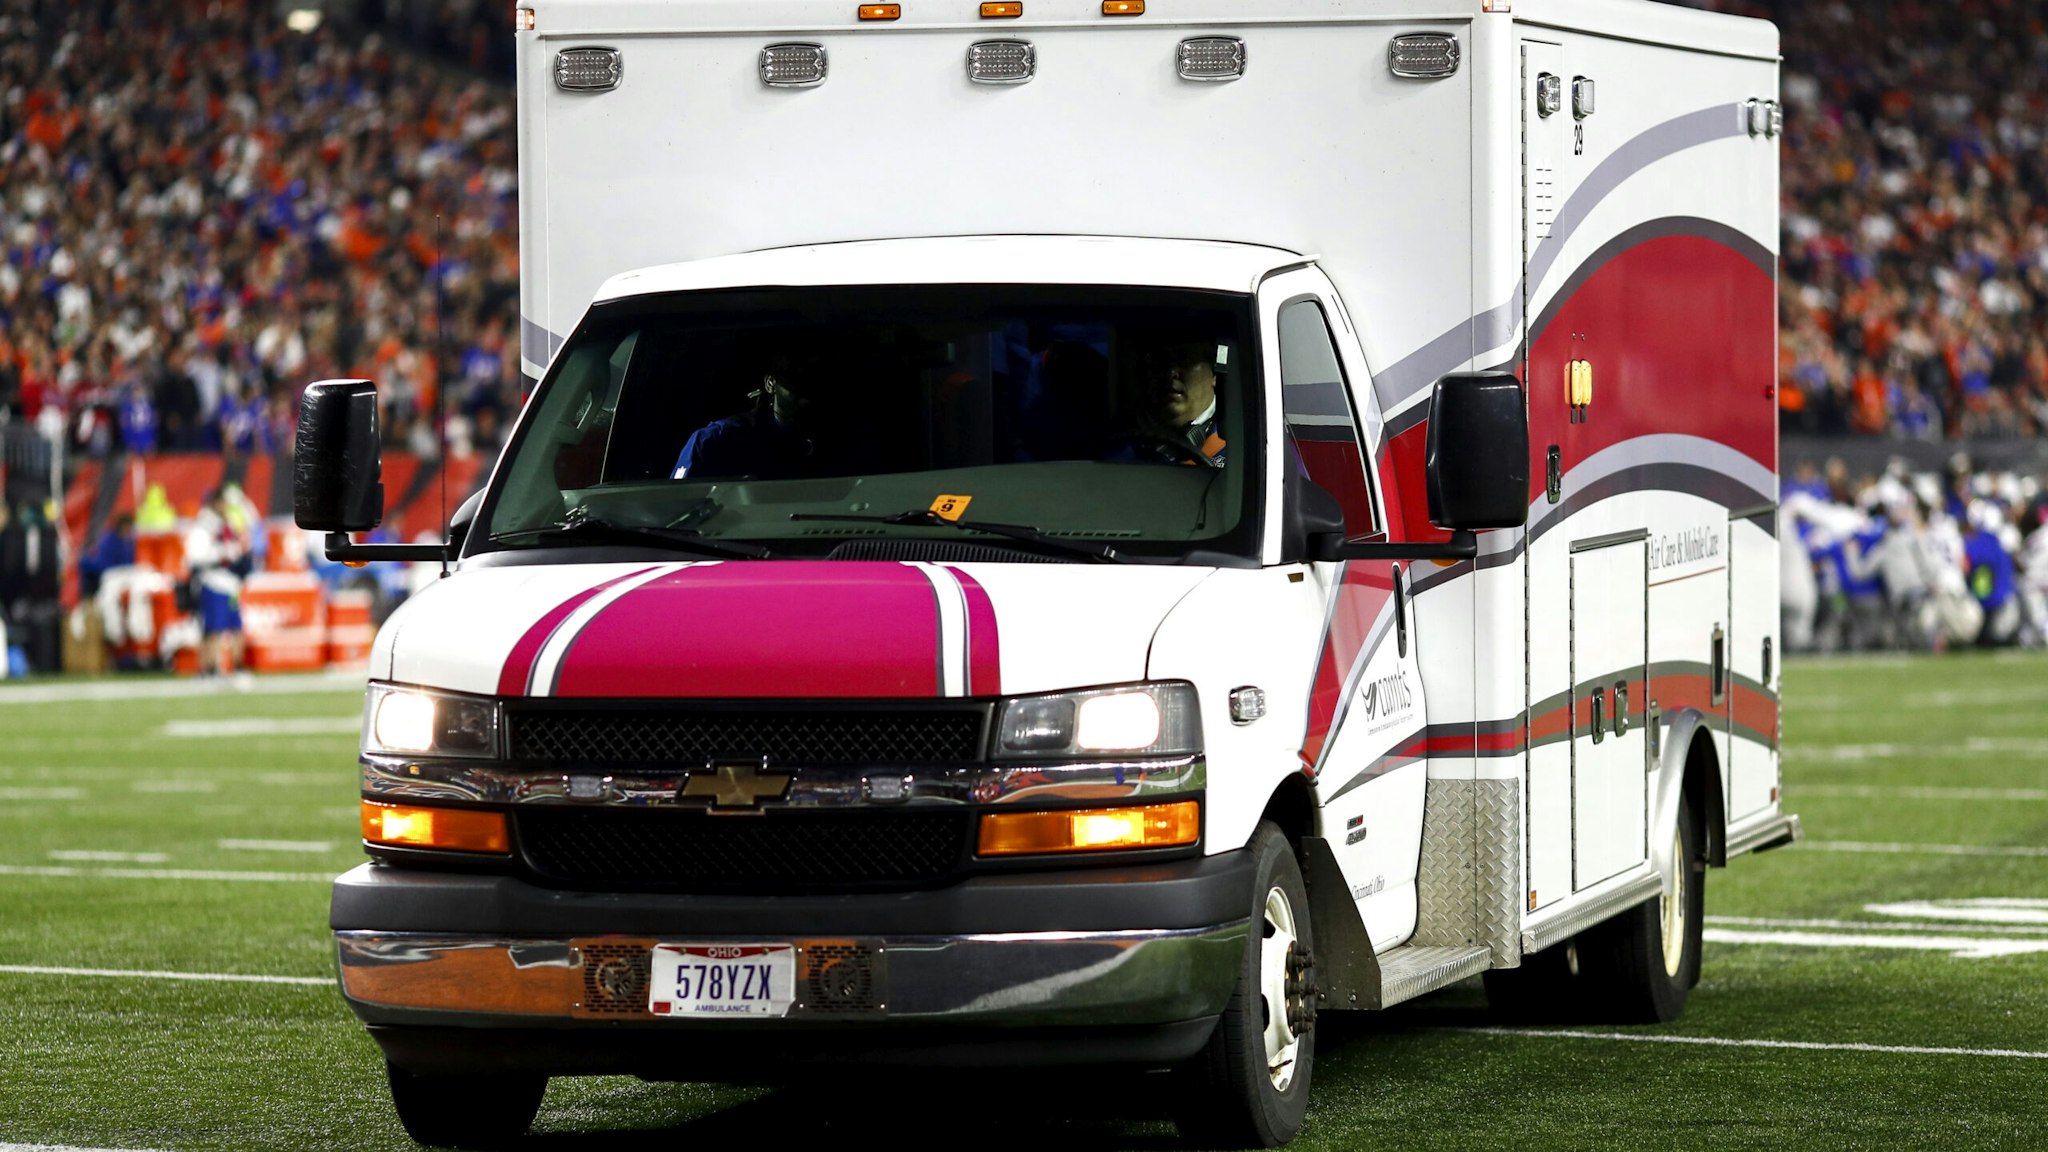 CINCINNATI, OH - JANUARY 2: Damar Hamlin #3 of the Buffalo Bills is driven off the field in an ambulance after sustaining an injury during the first quarter of an NFL football game against the Cincinnati Bengals at Paycor Stadium on January 2, 2023 in Cincinnati, Ohio.